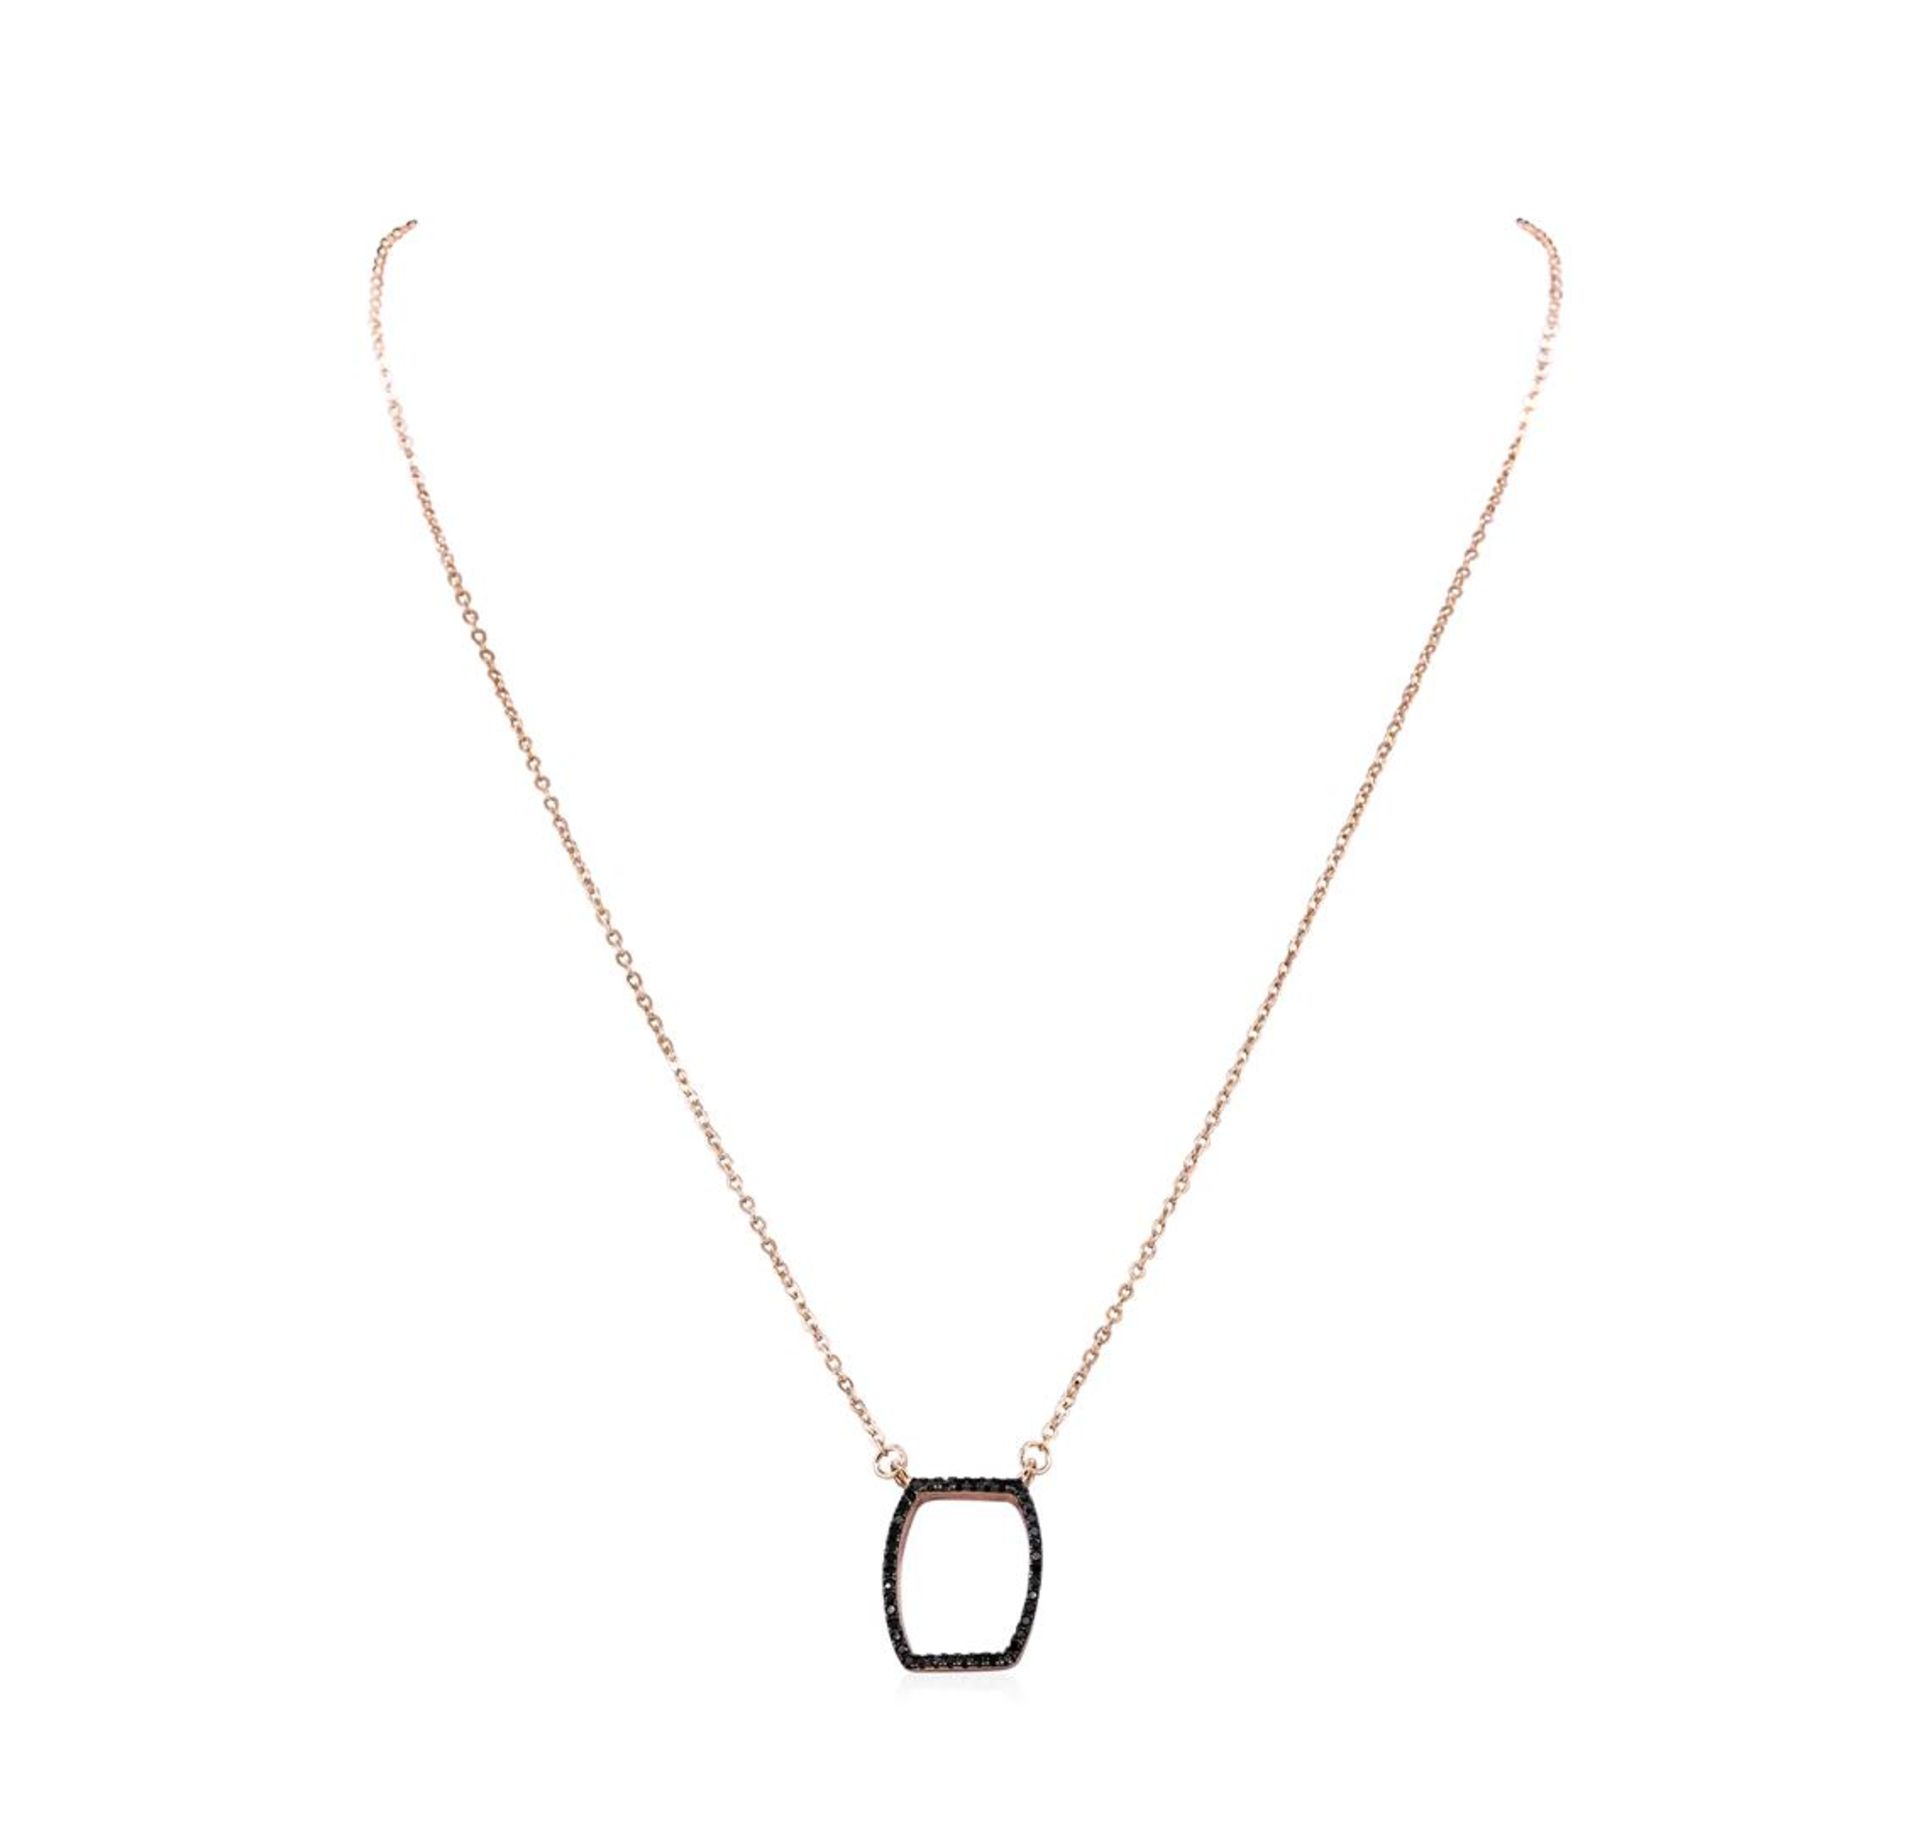 Black CZ Pendant Necklace - Rose Gold Plated - Image 2 of 2